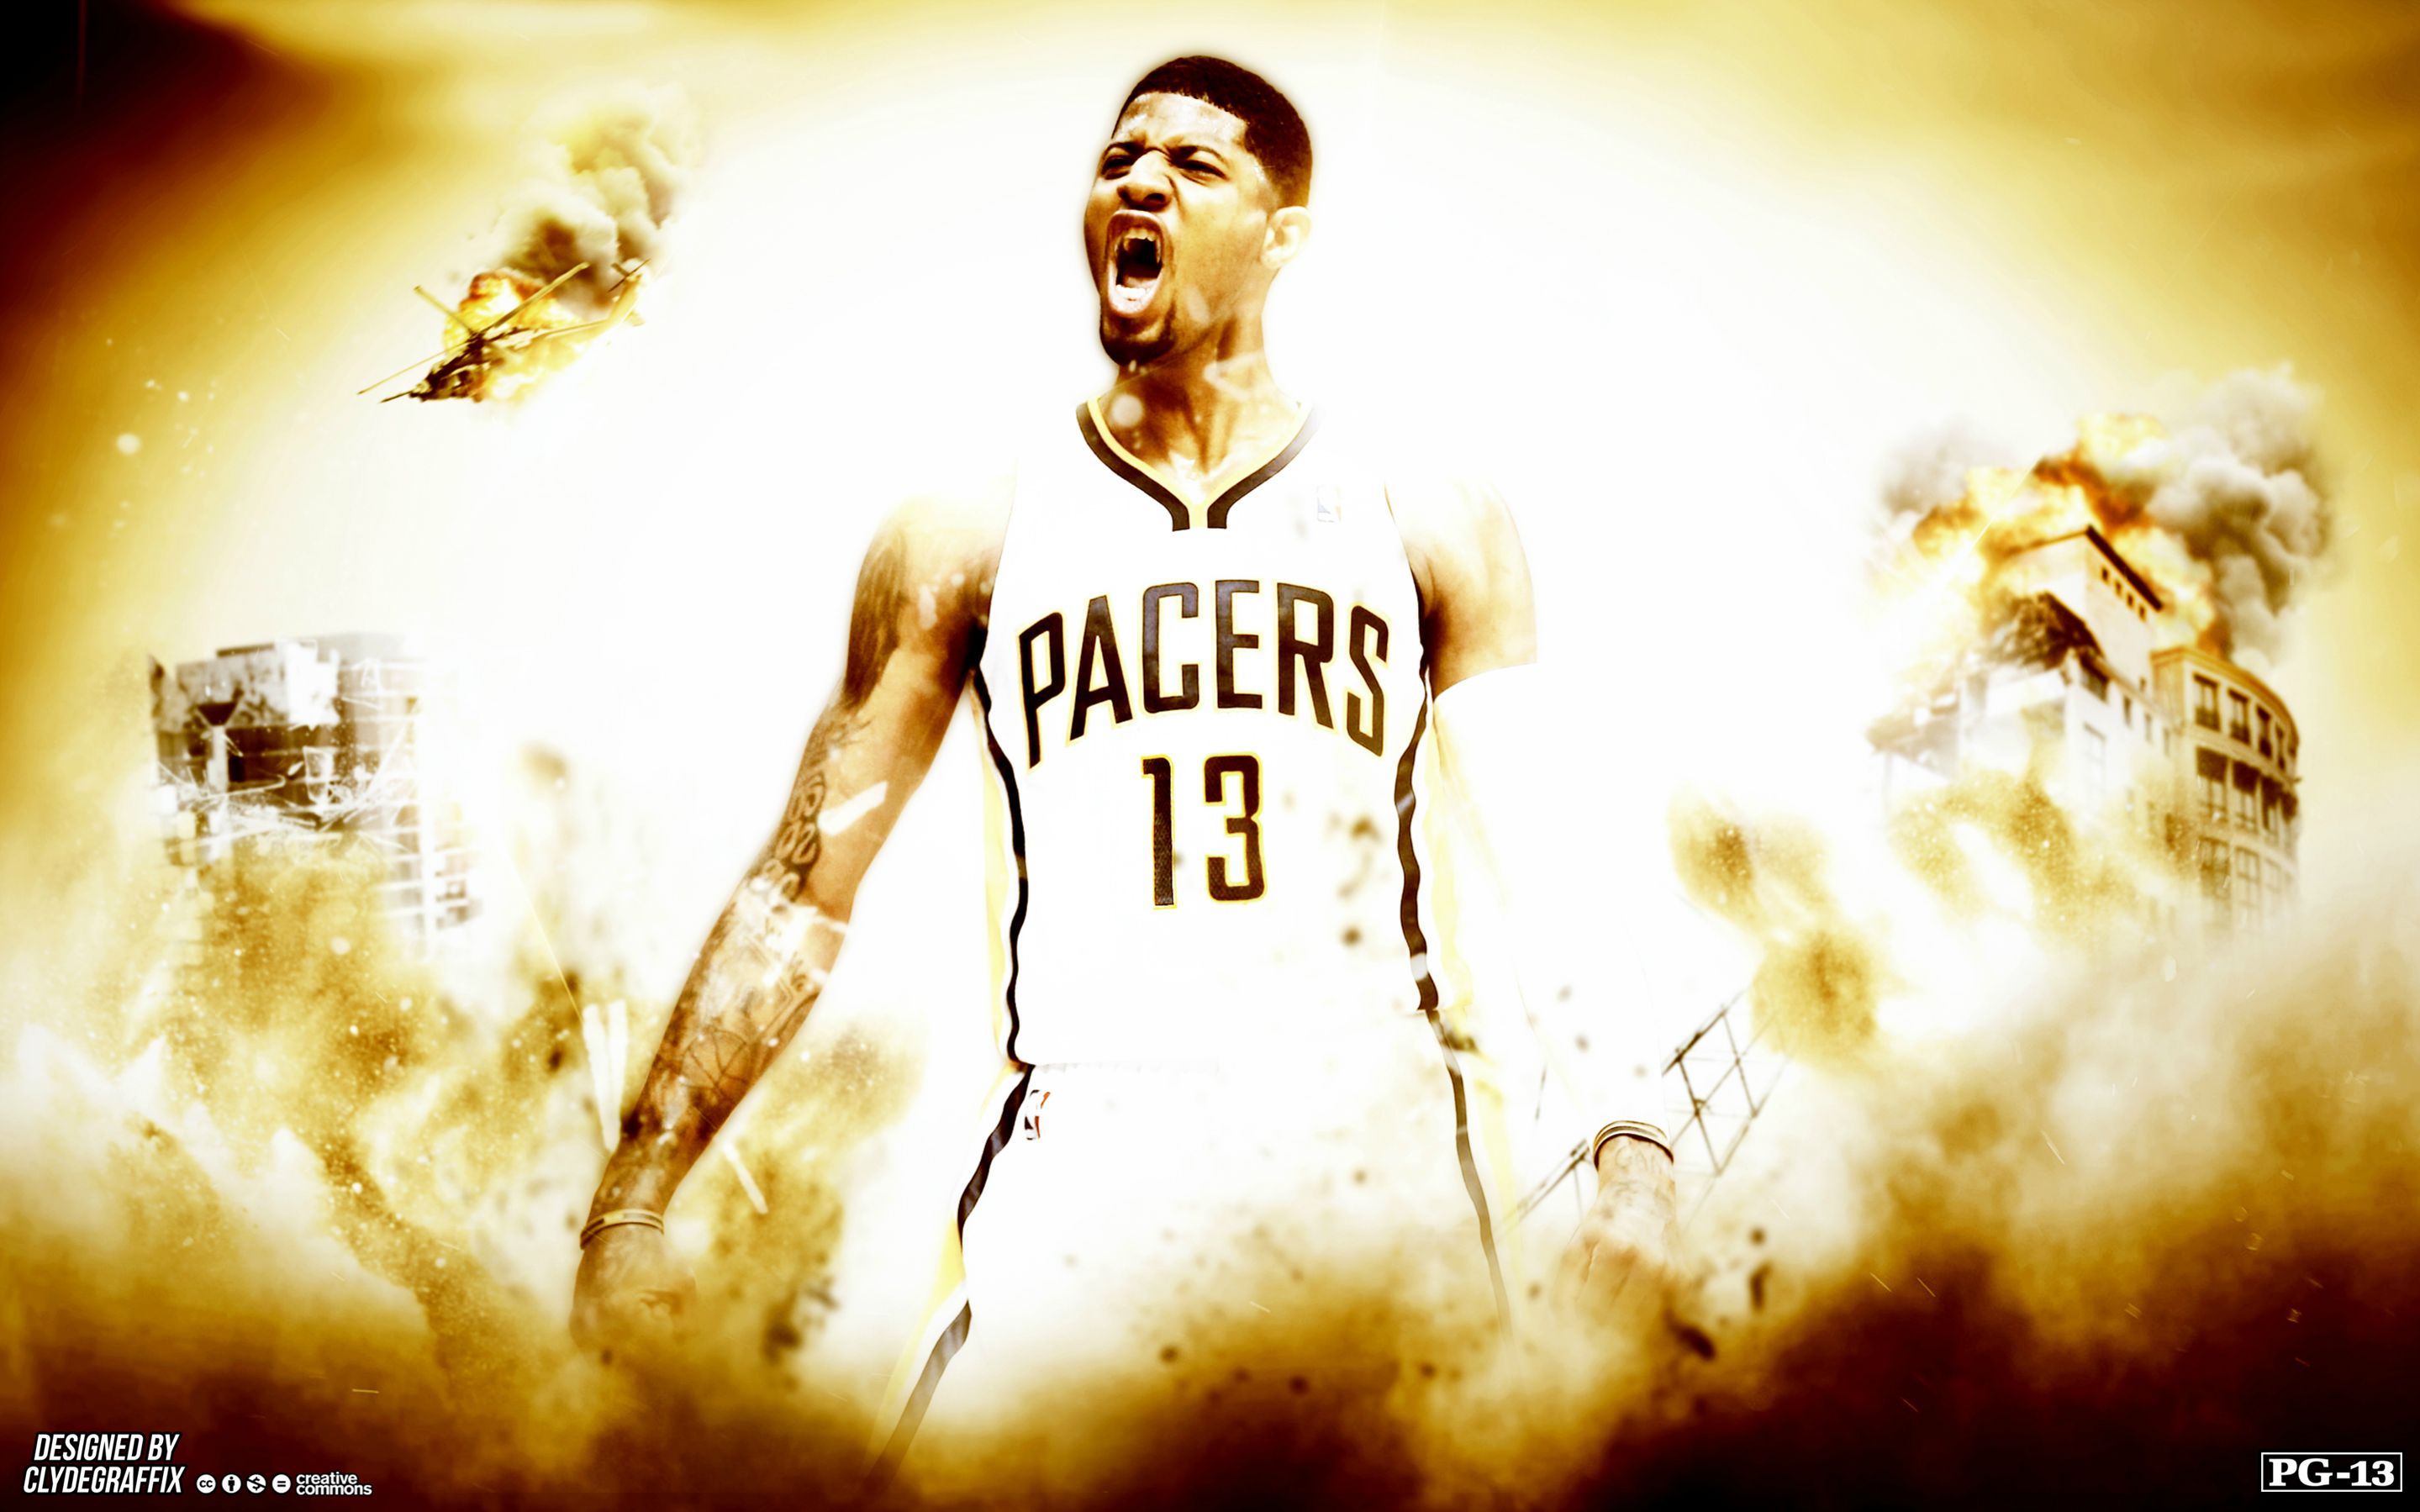 Made a Paul George wallpaper I thought you guys might like pacers